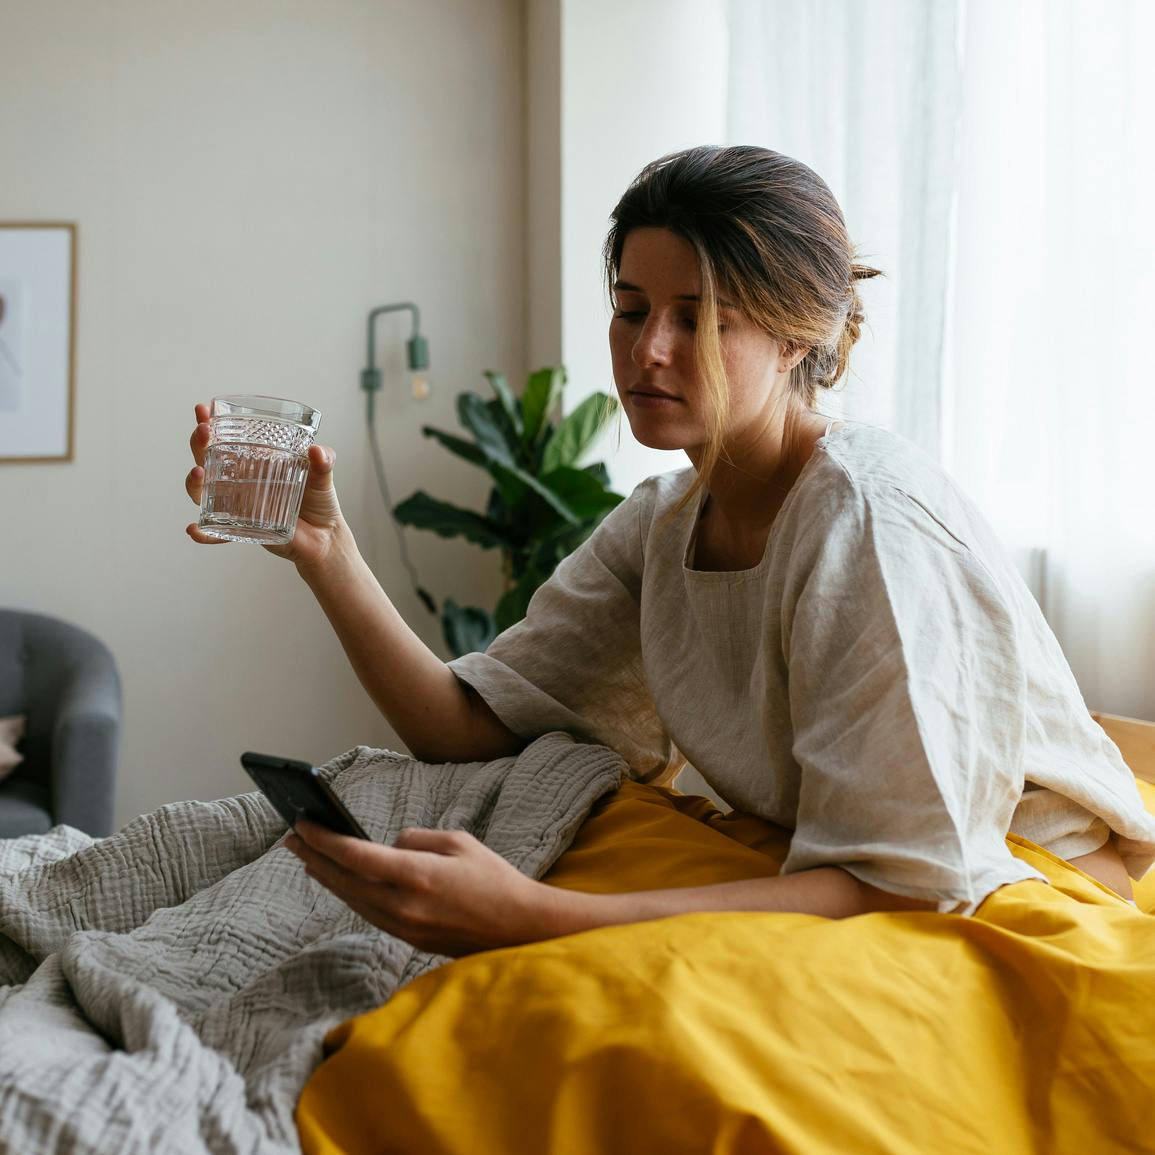 Young woman sick in bed, sitting up, under heavy covers, holding a glass of water in one hand, and her phone in the other, looking at the phone